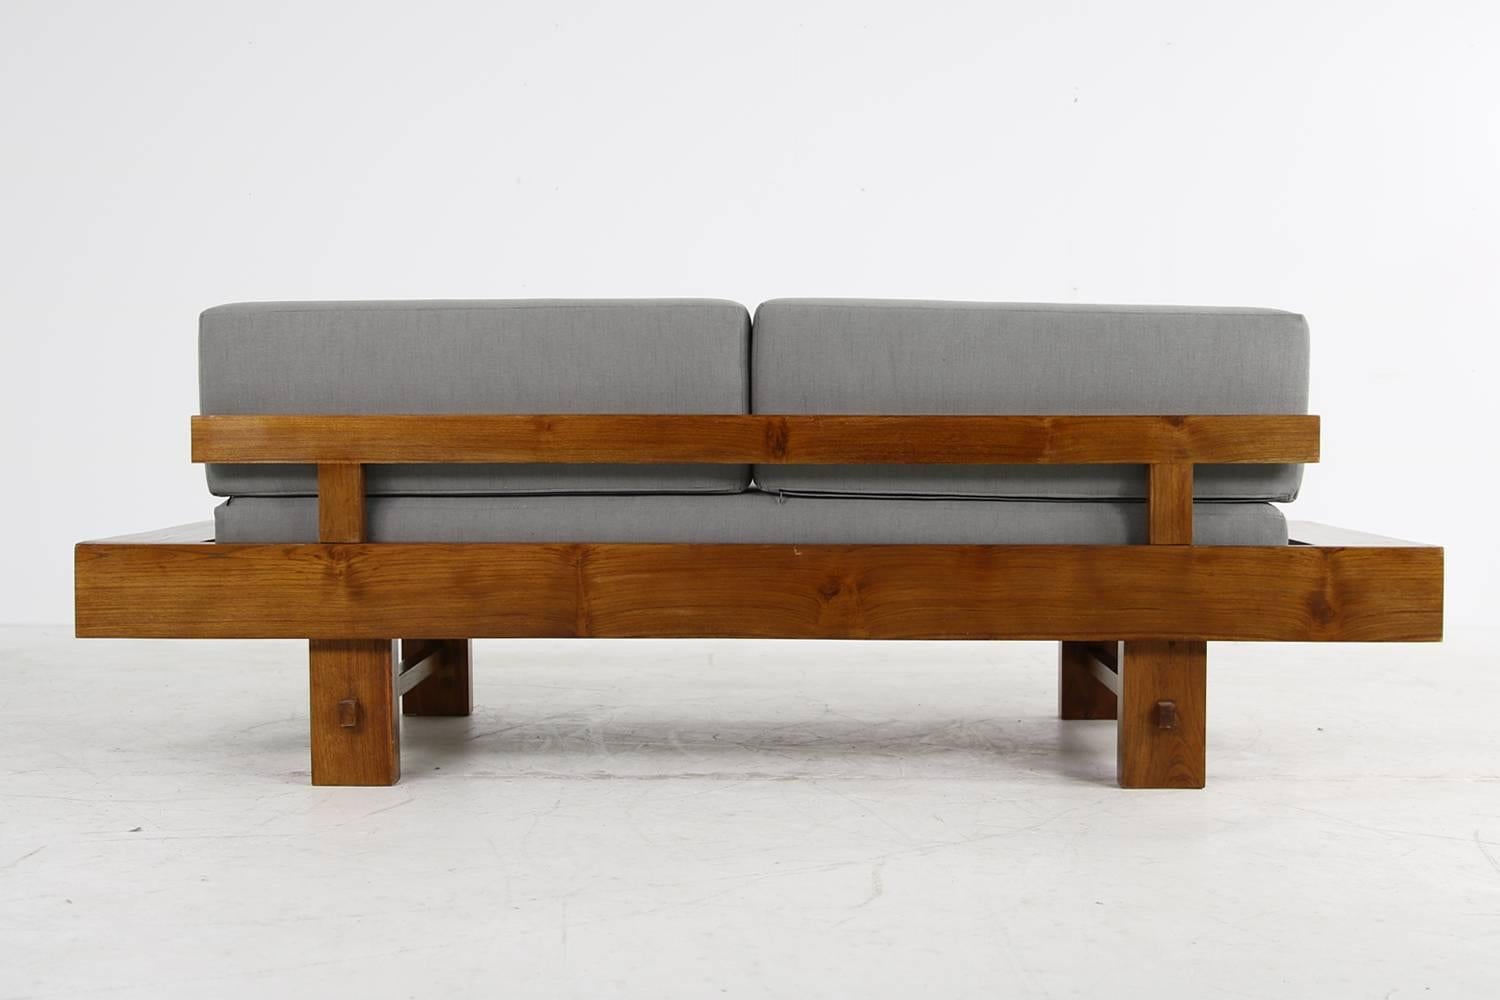 Super rare, solid balinese teak wood daybed, solid and heavy weight wood, teak or sheesham, overall solid wood, new upholstery and covered with new woven cotton fabric in grey, free standing, fantastic wood and patina, a masterpiece and an unique